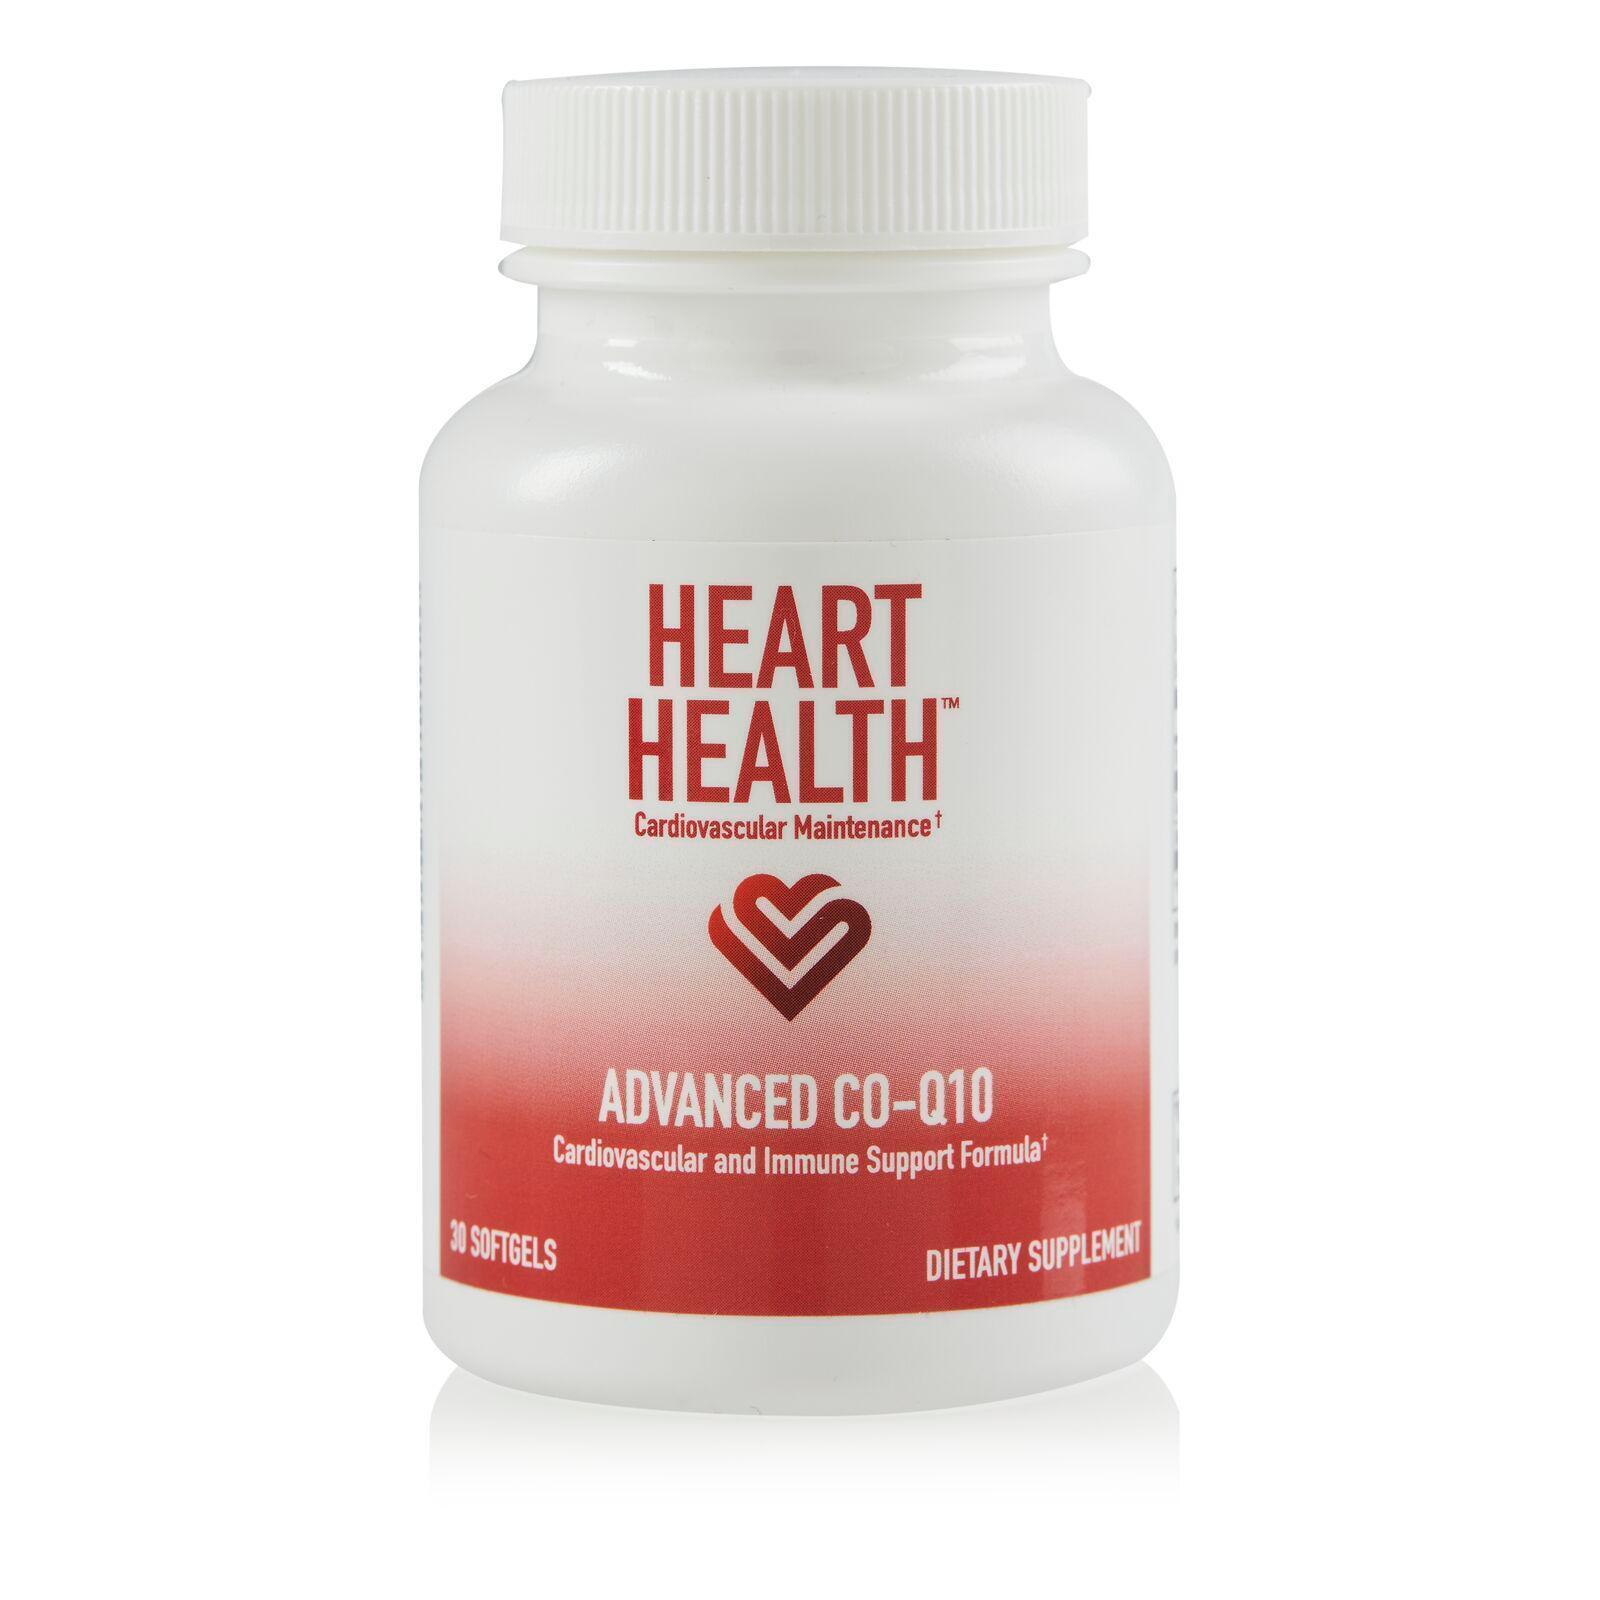 Heart Health Advanced Co-Q10 (Cardiovascular & Immune Support),Essentials, Product Tested no detectable GMO